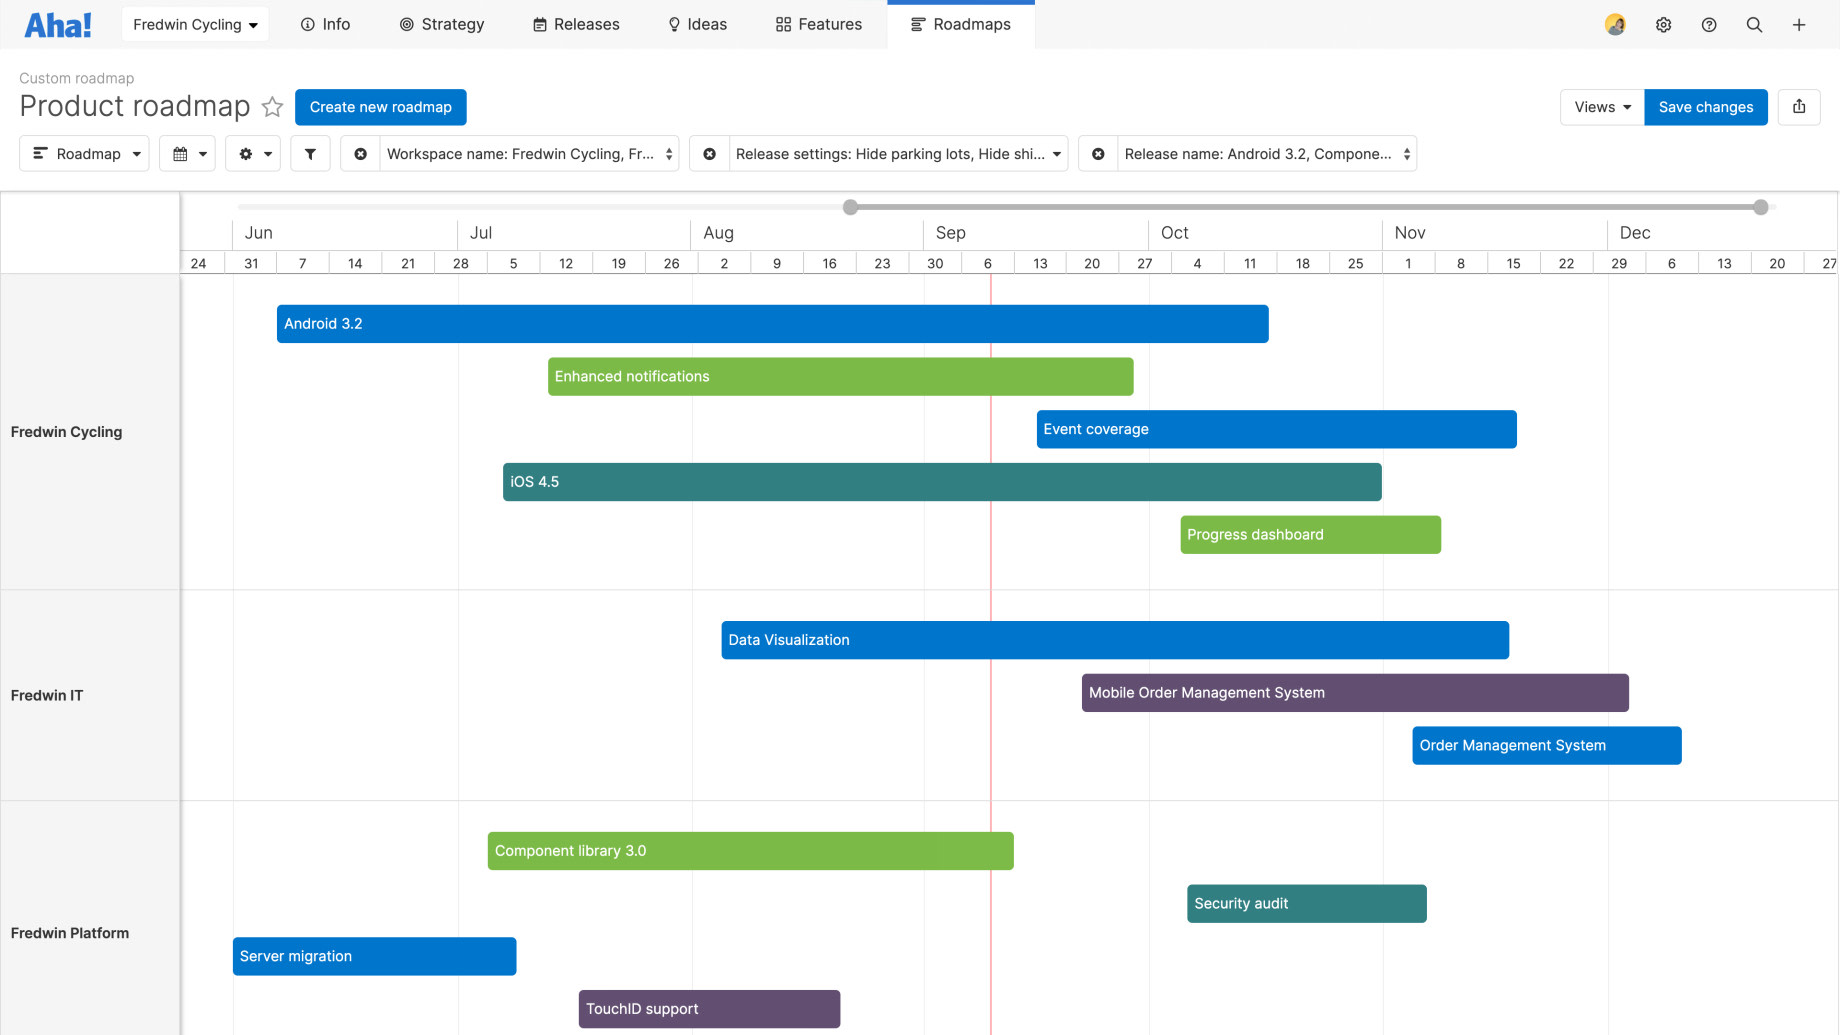 A custom roadmap with workspaces and releases